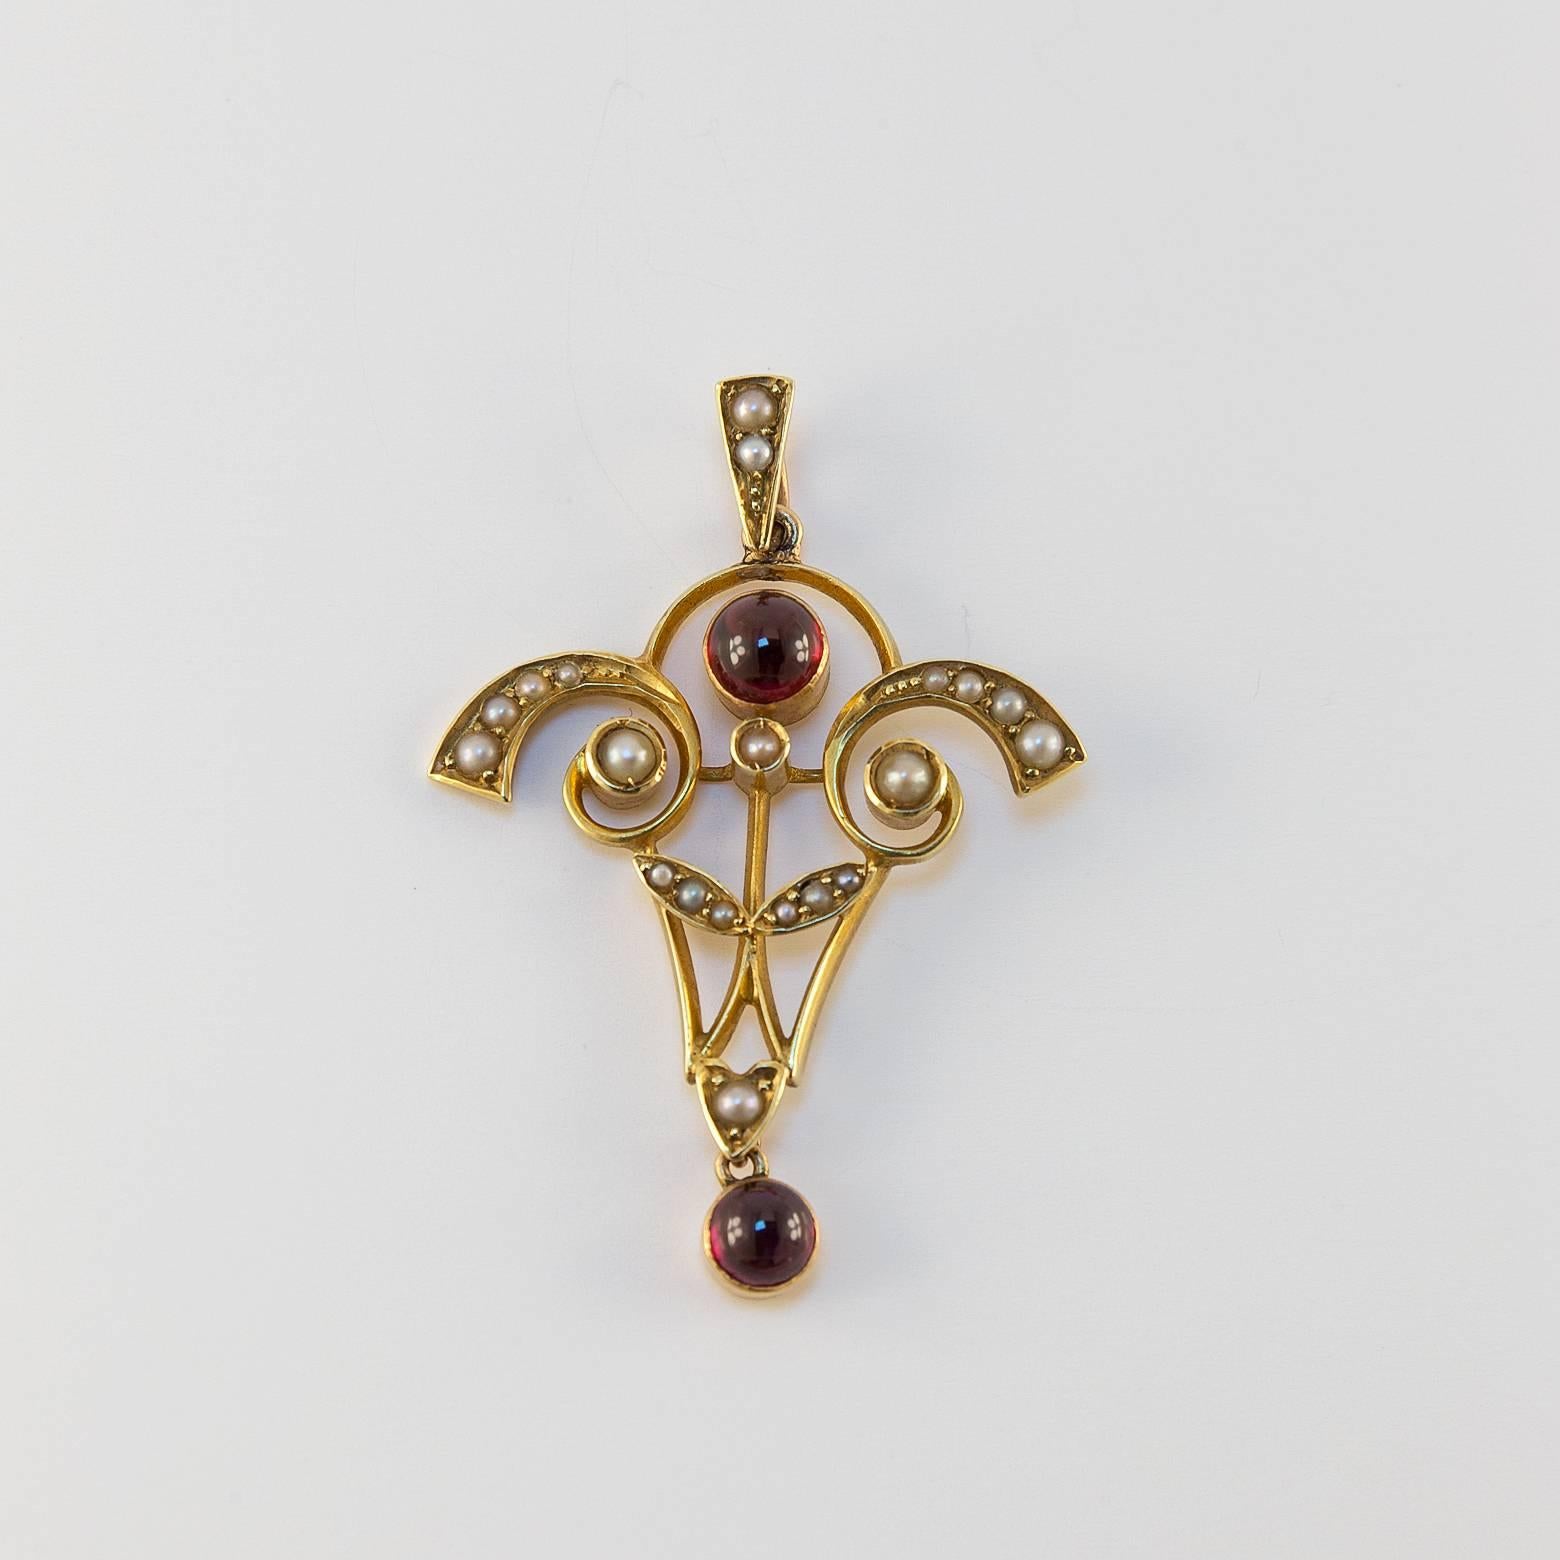 Gorgeous Art Nouveau Garnet and Pearl Pendant! This antique pendant is a unique 15K Yellow gold and glimmers with 20 pearls and 2 warm garnets. It's in excellent condition and is a great time-piece! Chain sold 